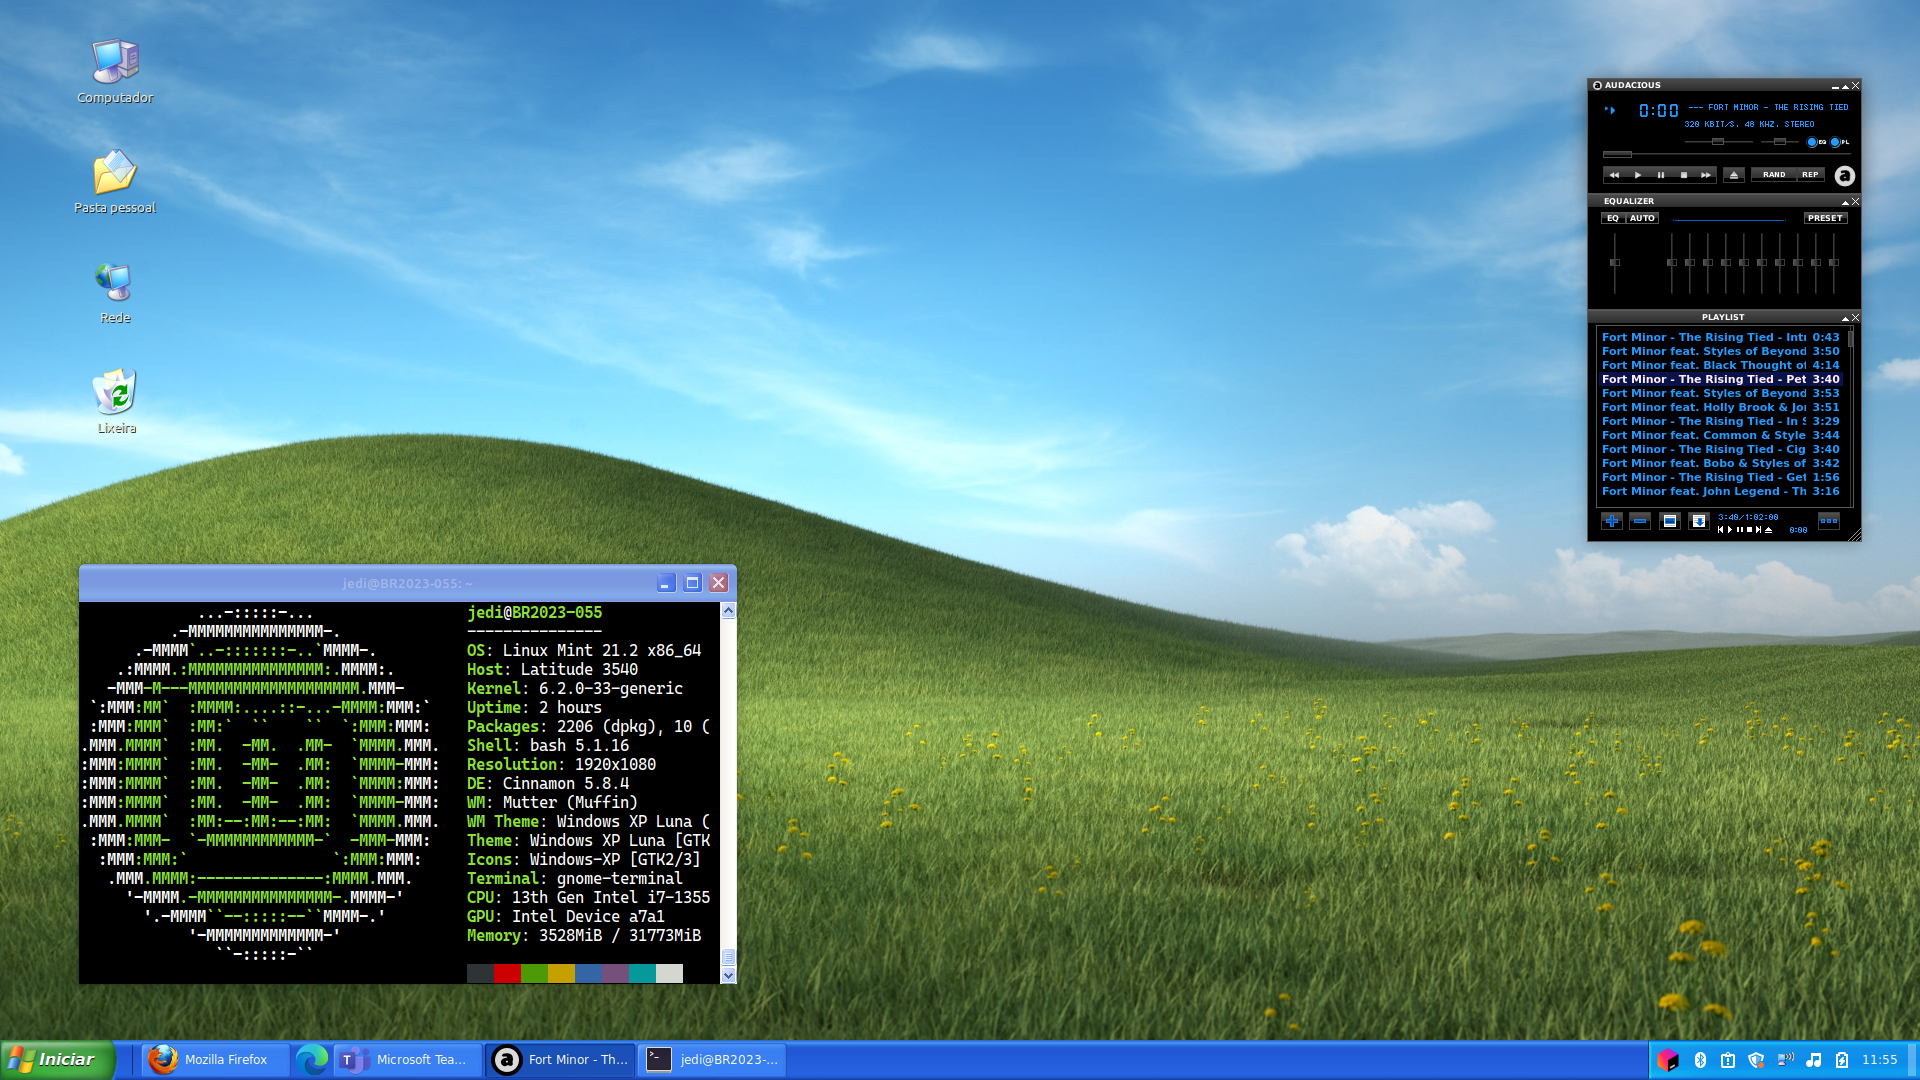 A desktop environment screenshot that looks a Windows XP, with its iconic "Bliss" wallpaper depicting a green hill and a blue sky with clouds above.

There's two windows on the screen. One of them is a music player in black and blue, playing a MP3 from Fort Minor. The other is a Terminal console showing the machine specifications (Dell Latitude 3540, Linux Mint 21.2)